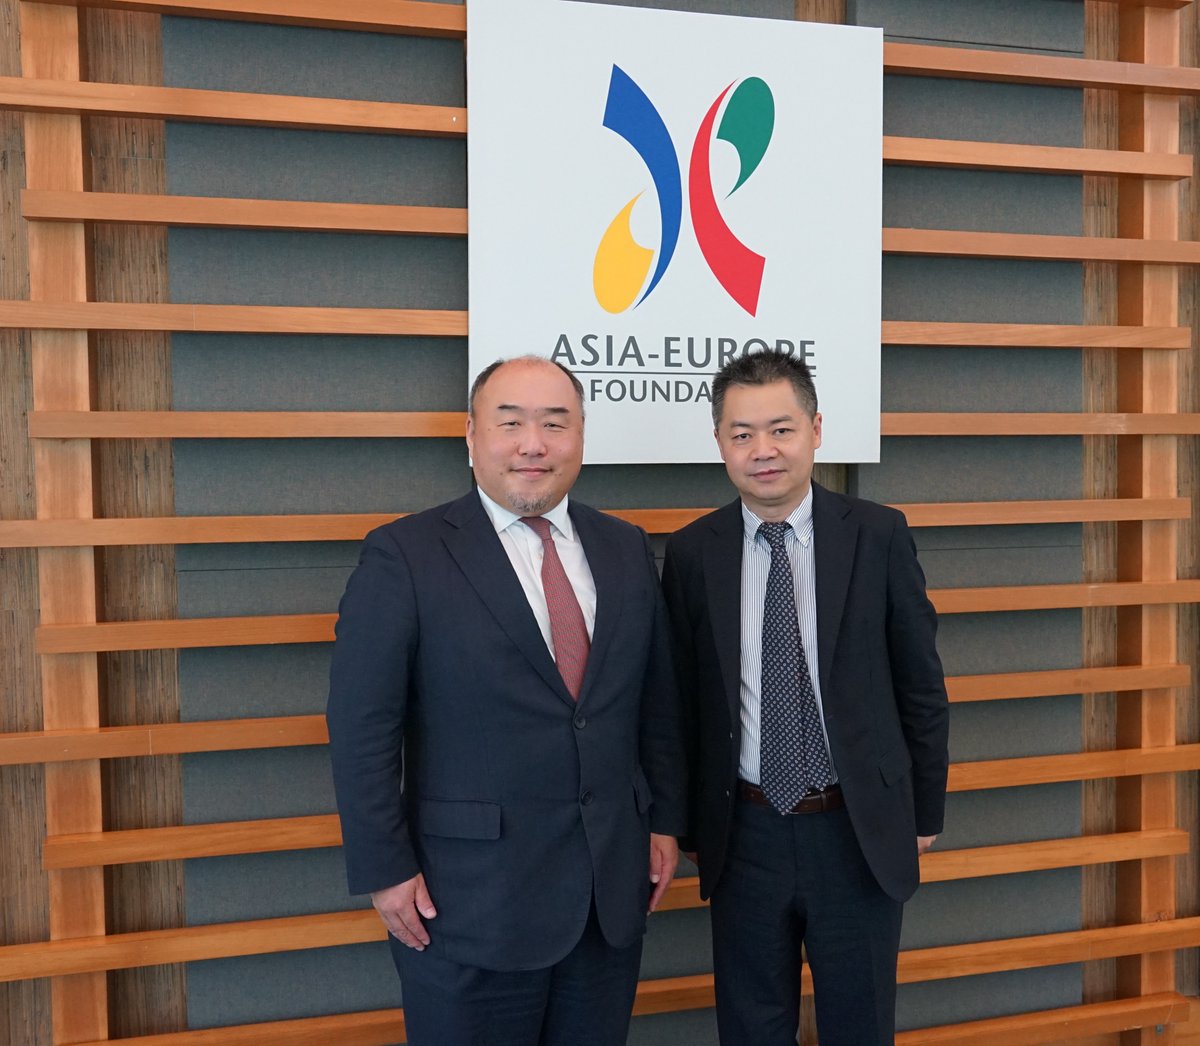 Amb MORIKAWA Toru, #ASEF Exec Dir, welcomed visit by delegation from #China, headed by Mr JIANG Duan, ASEM Senior Official, to discuss the role of ASEF in the future of #Asia-#Europe relations & possibilities to enhance #cooperation. Mr JIANG reiterated China’s support to ASEF. https://t.co/MBxEHXdA4t